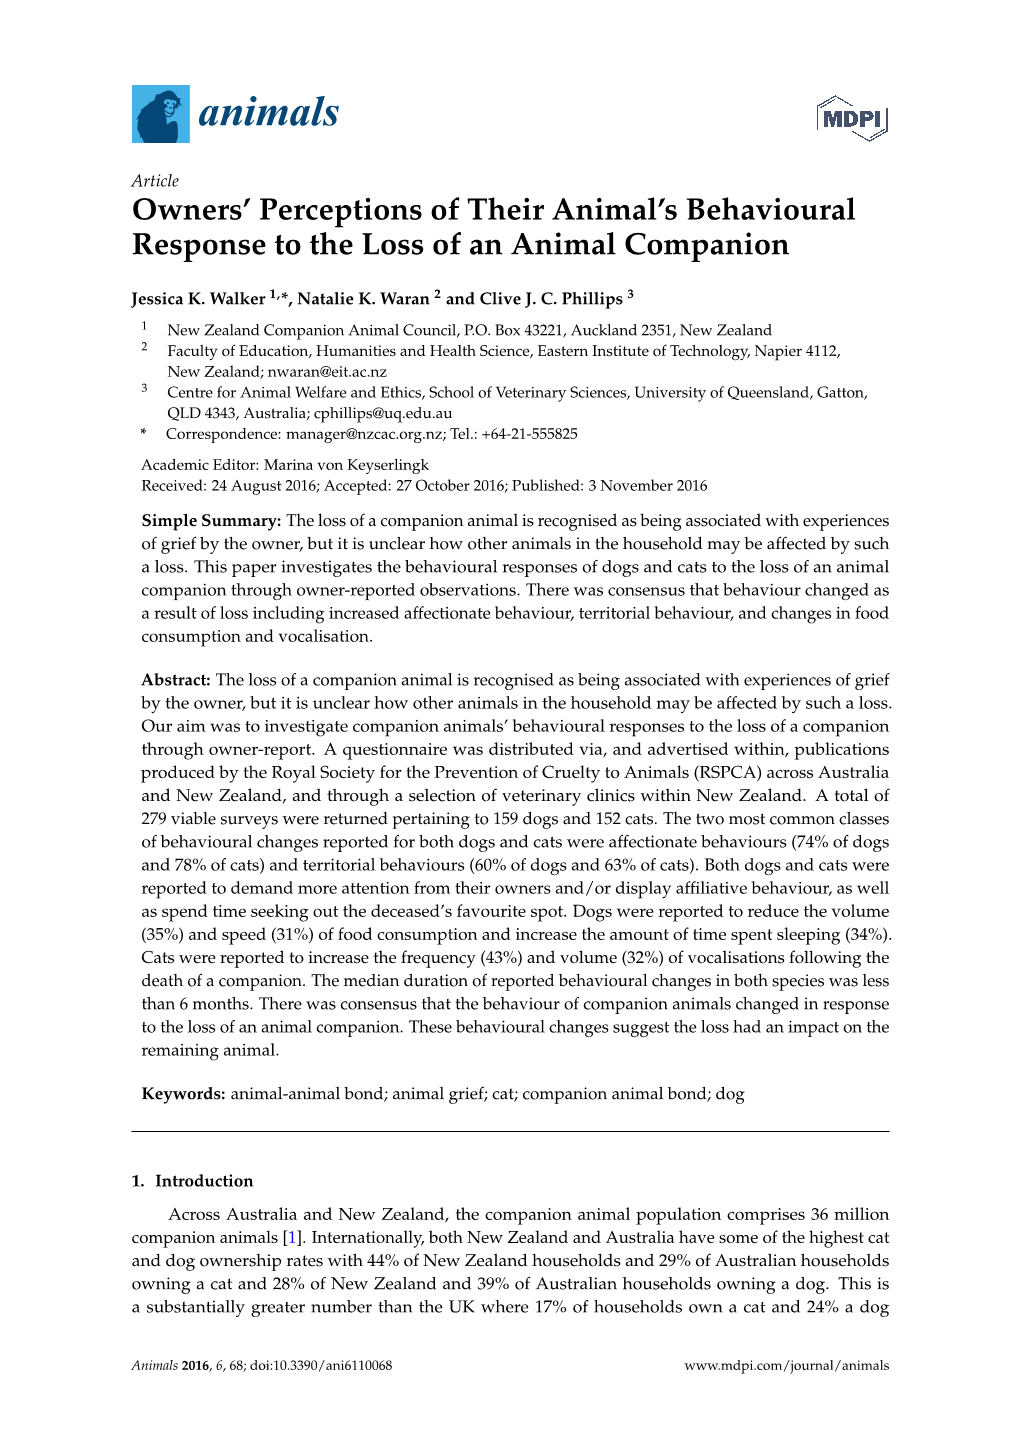 Owners' Perceptions of Their Animal's Behavioural Response to the Loss of an Animal Companion